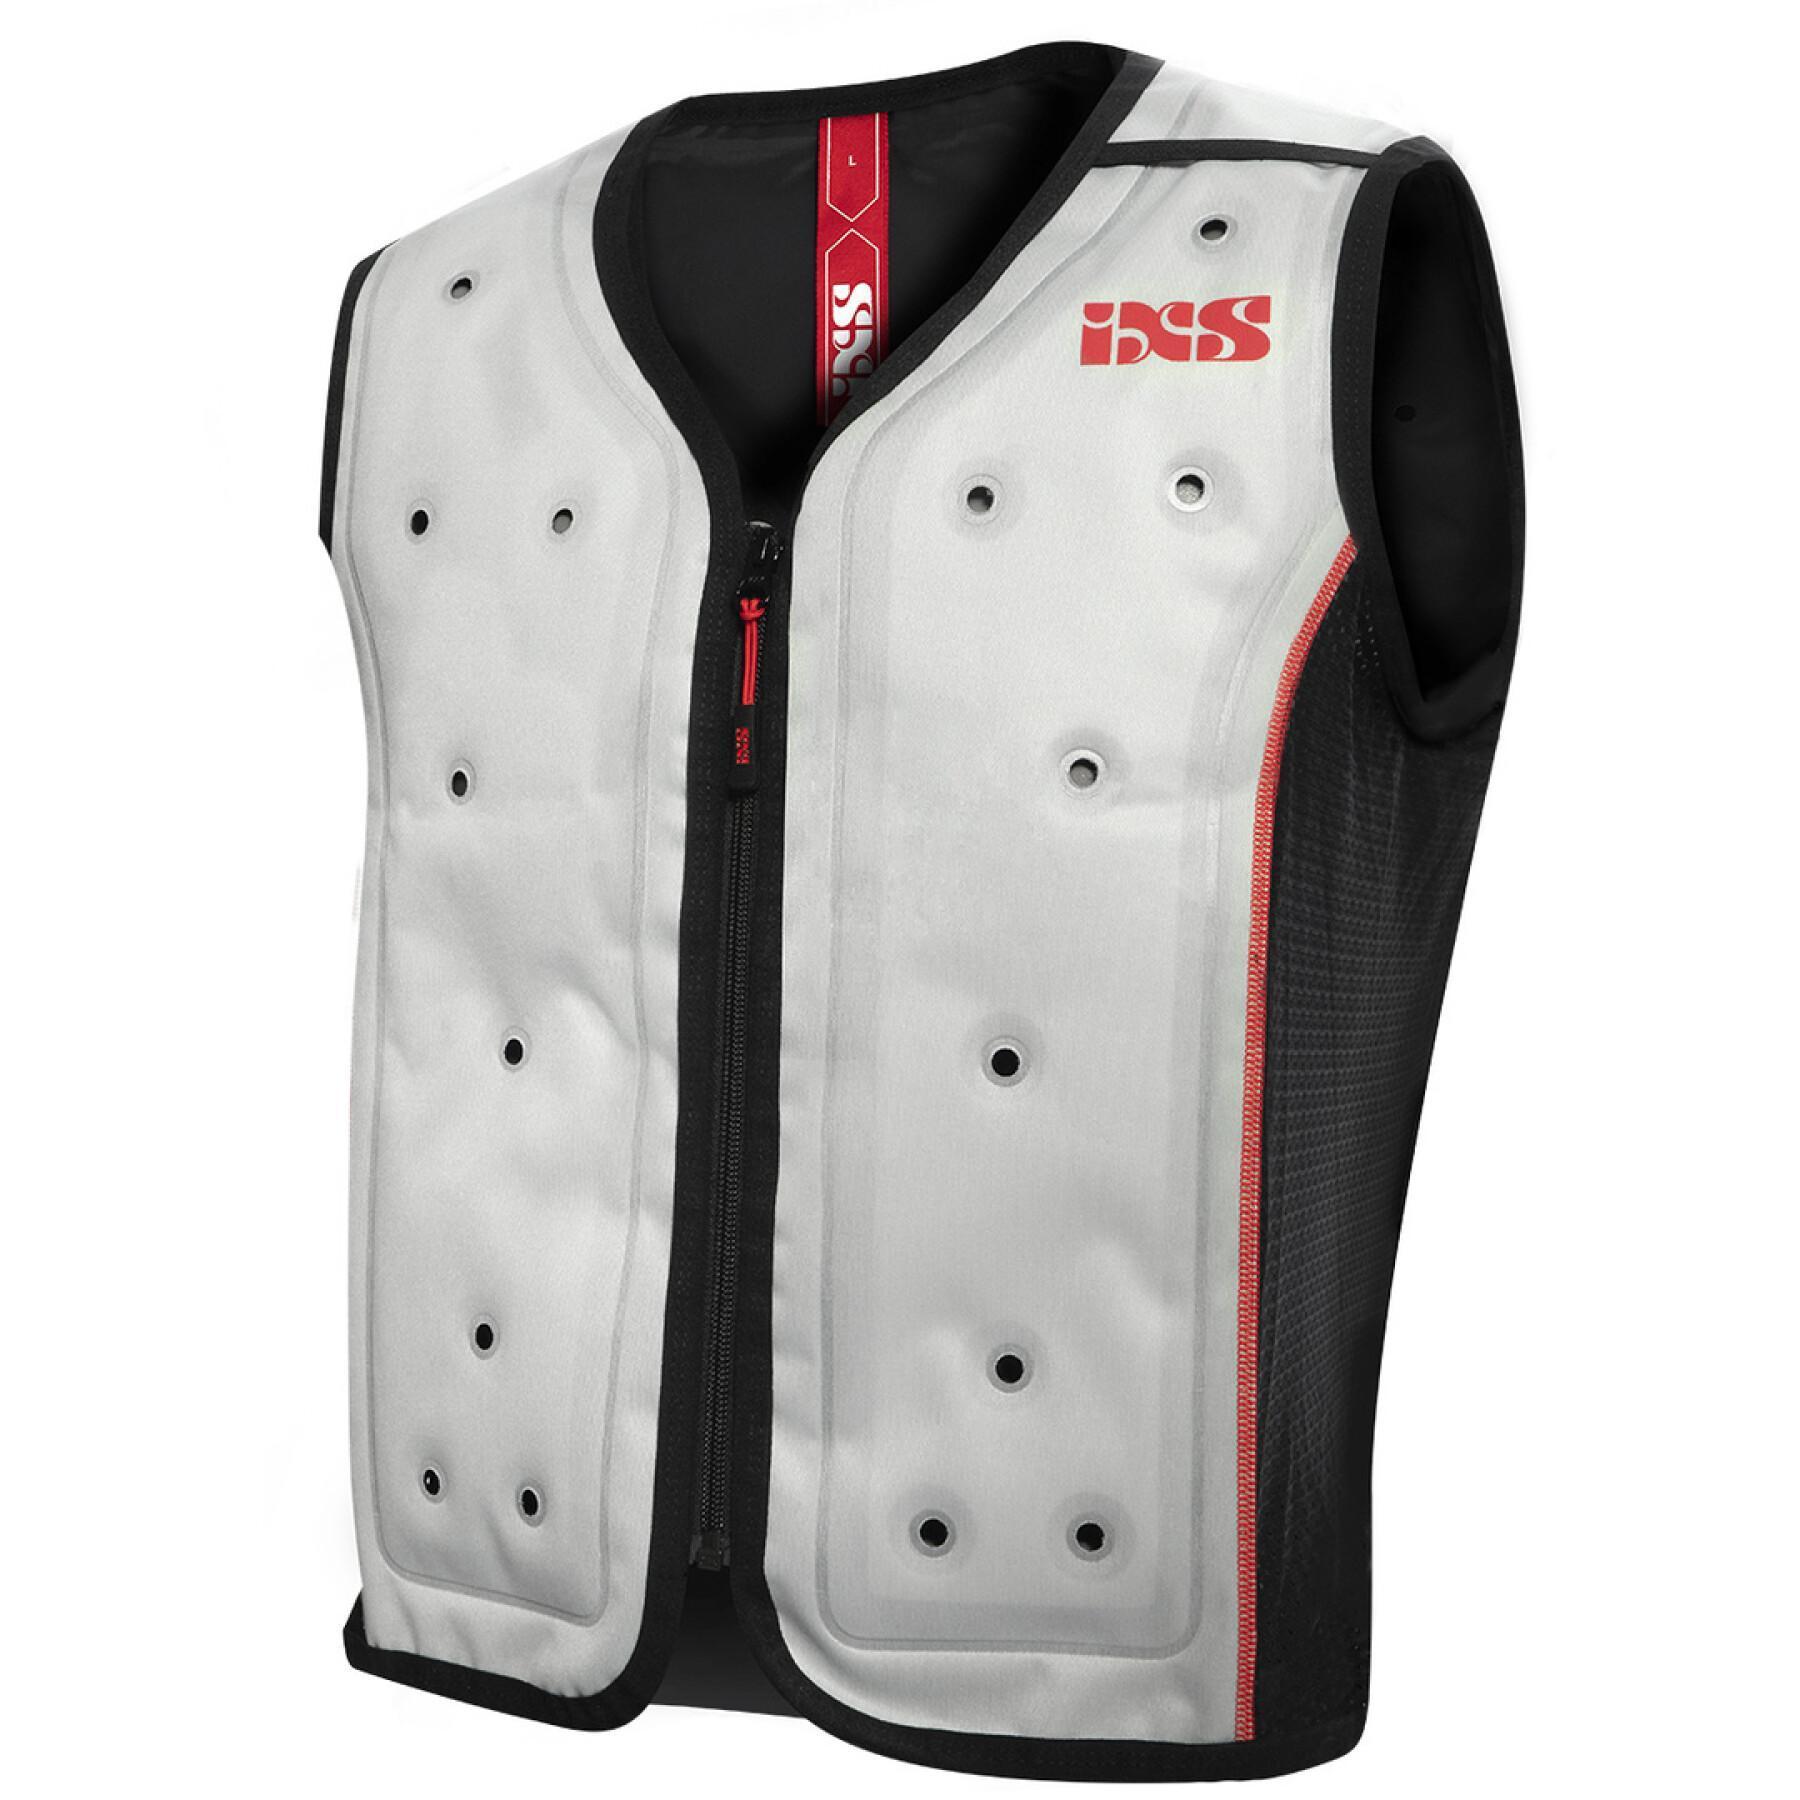 Cooling vest IXS bodycool dry